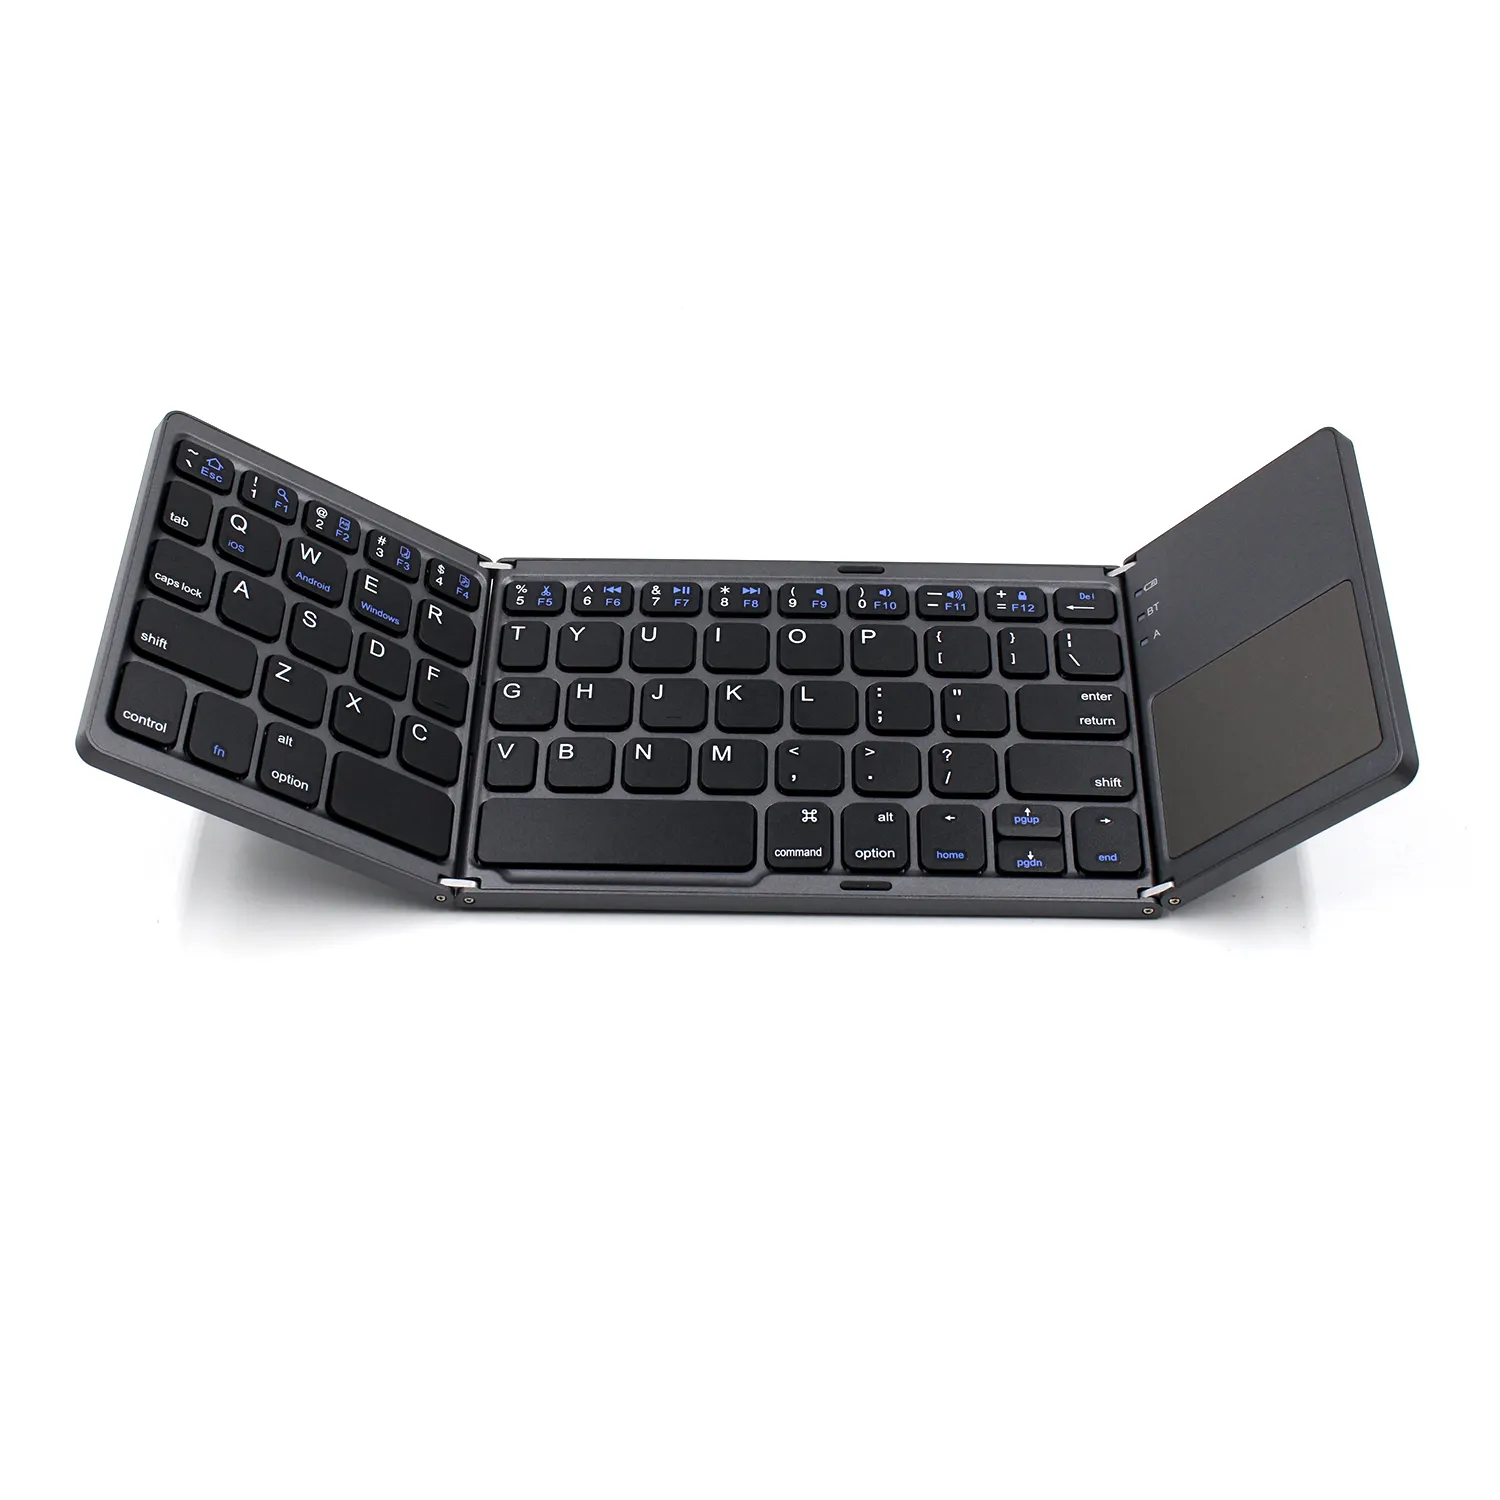 China Factory 3 level Foldable Blue-tooth Touchpad office Keyboard for ipad ios android tablet pc Mobile phone folding MIni keyb